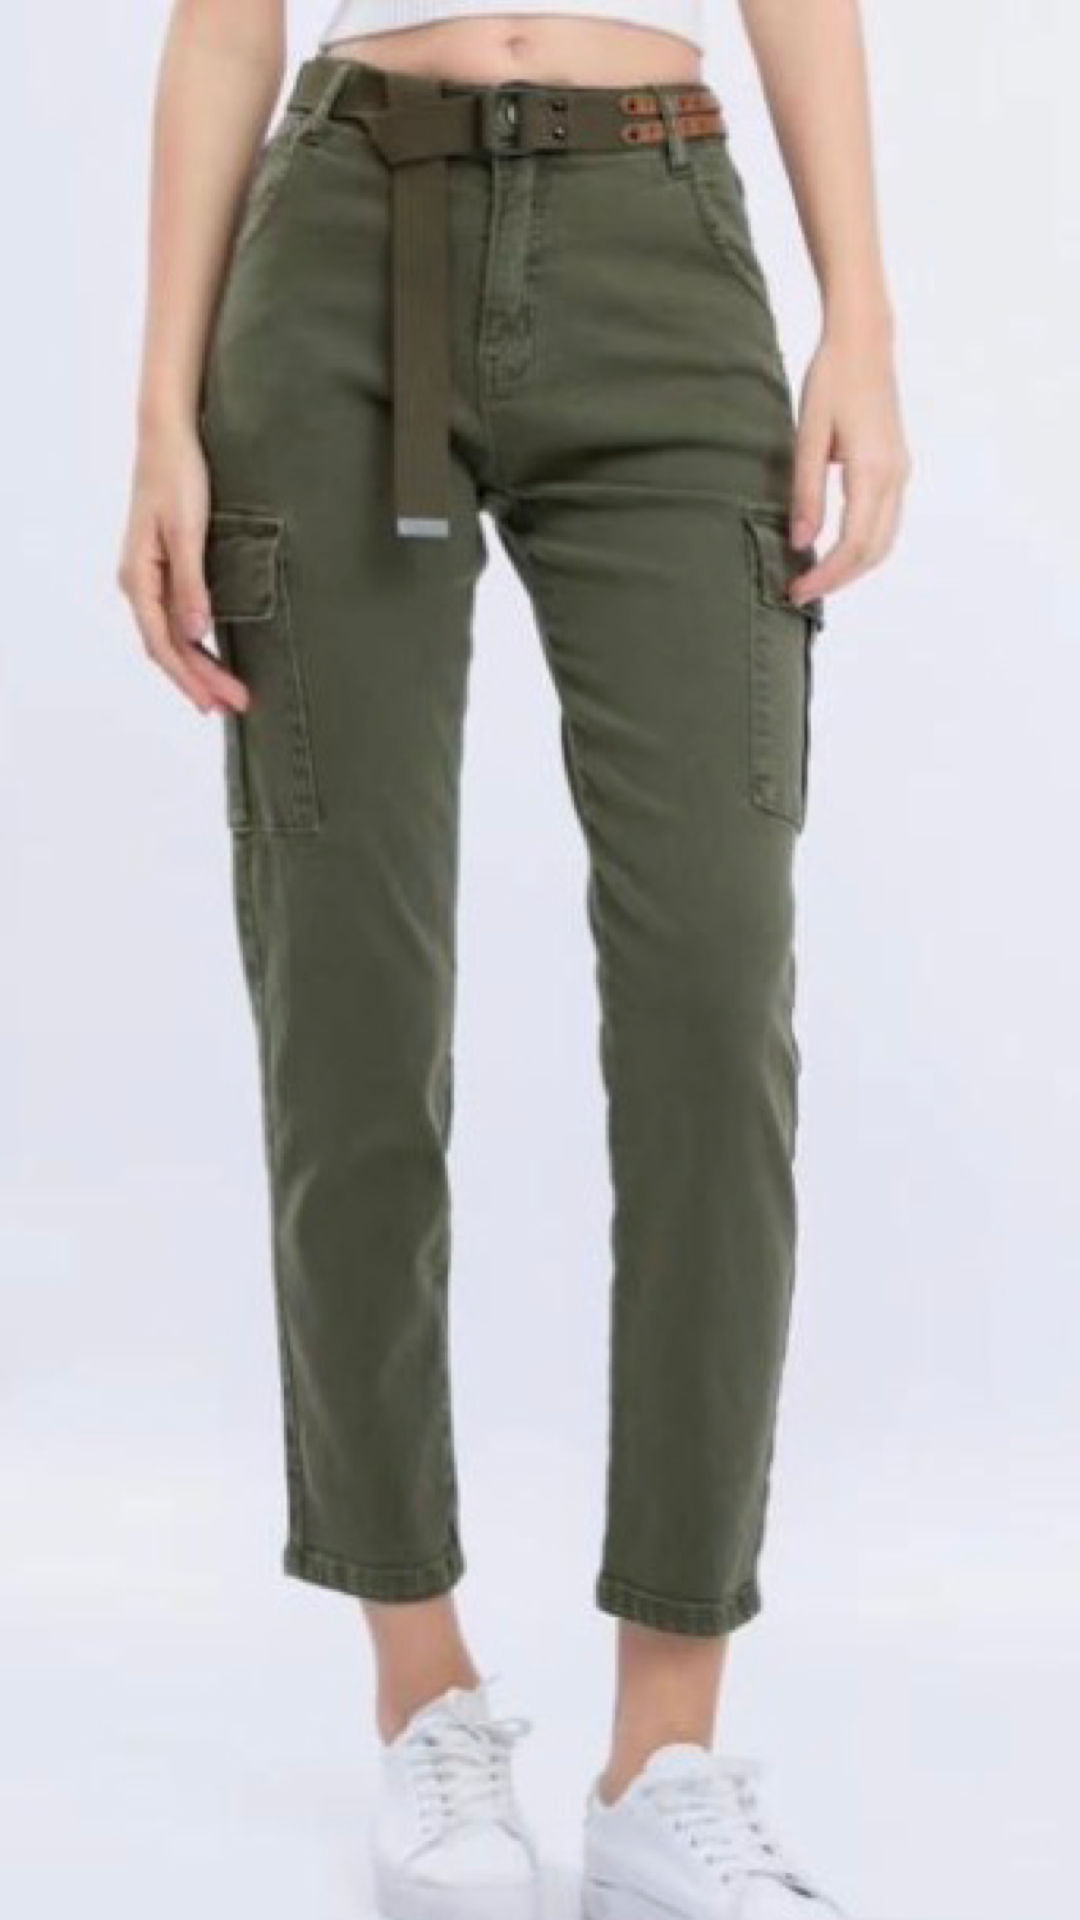 Cargo casual pants by obscur